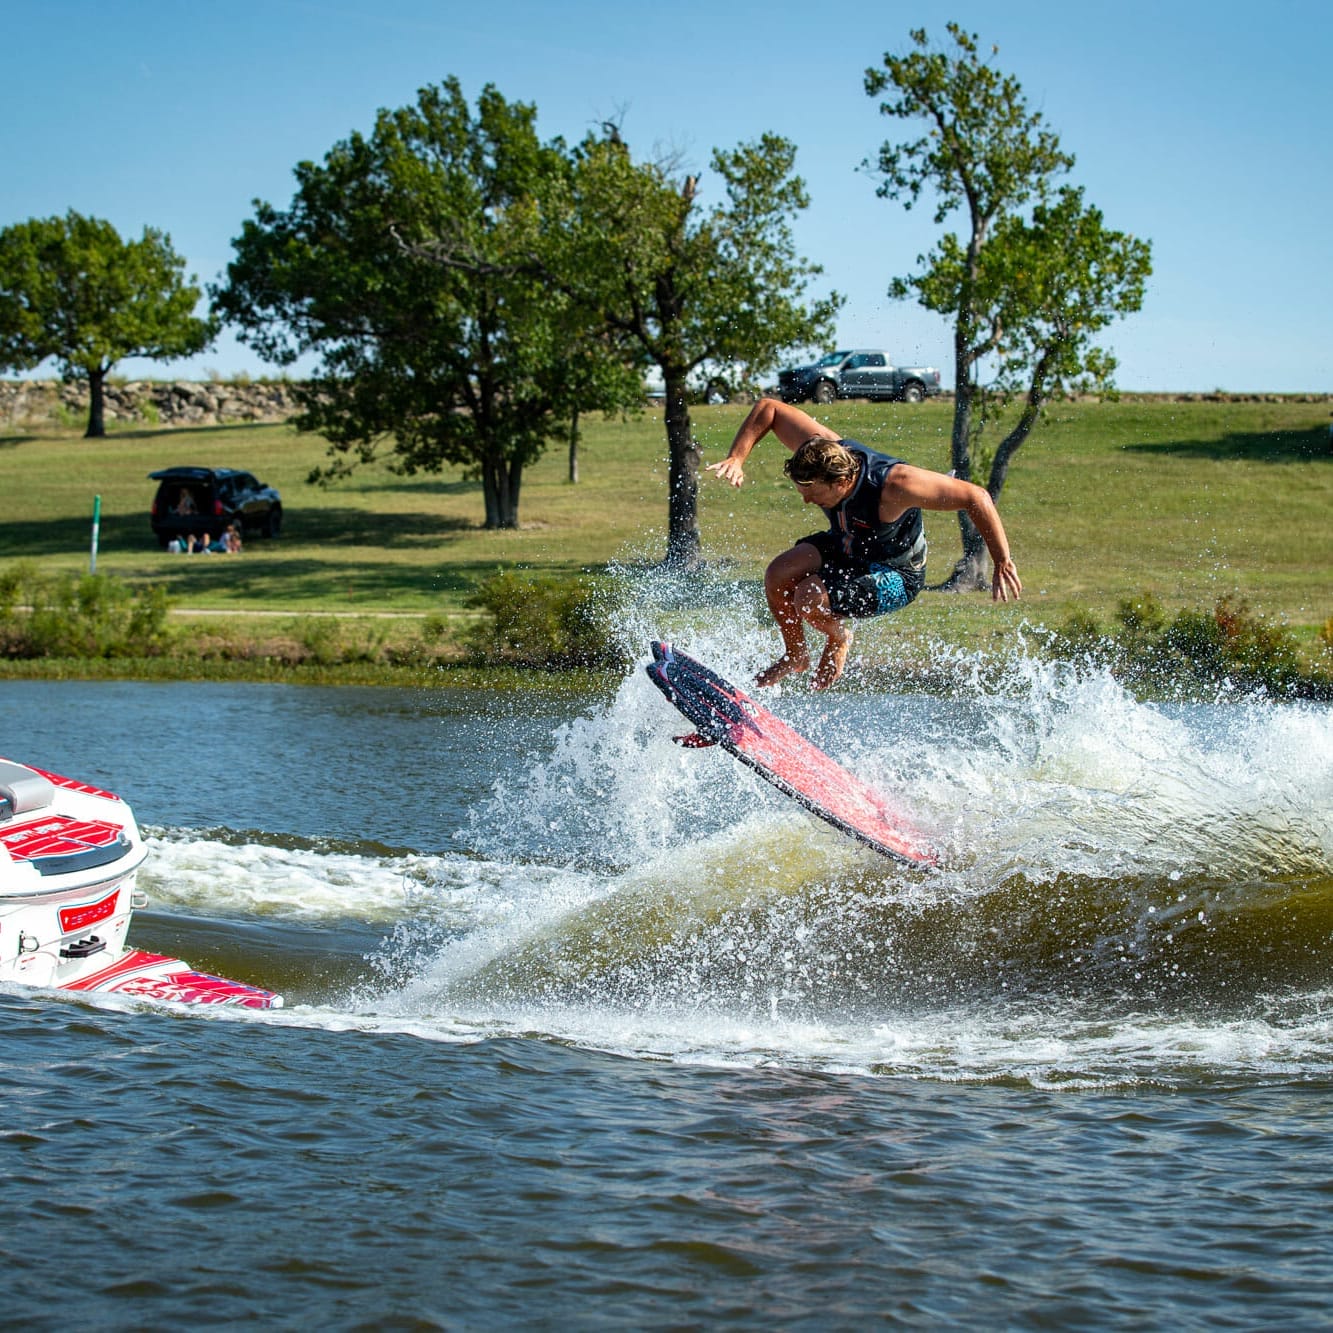 A man is wakesurfing behind a boat.